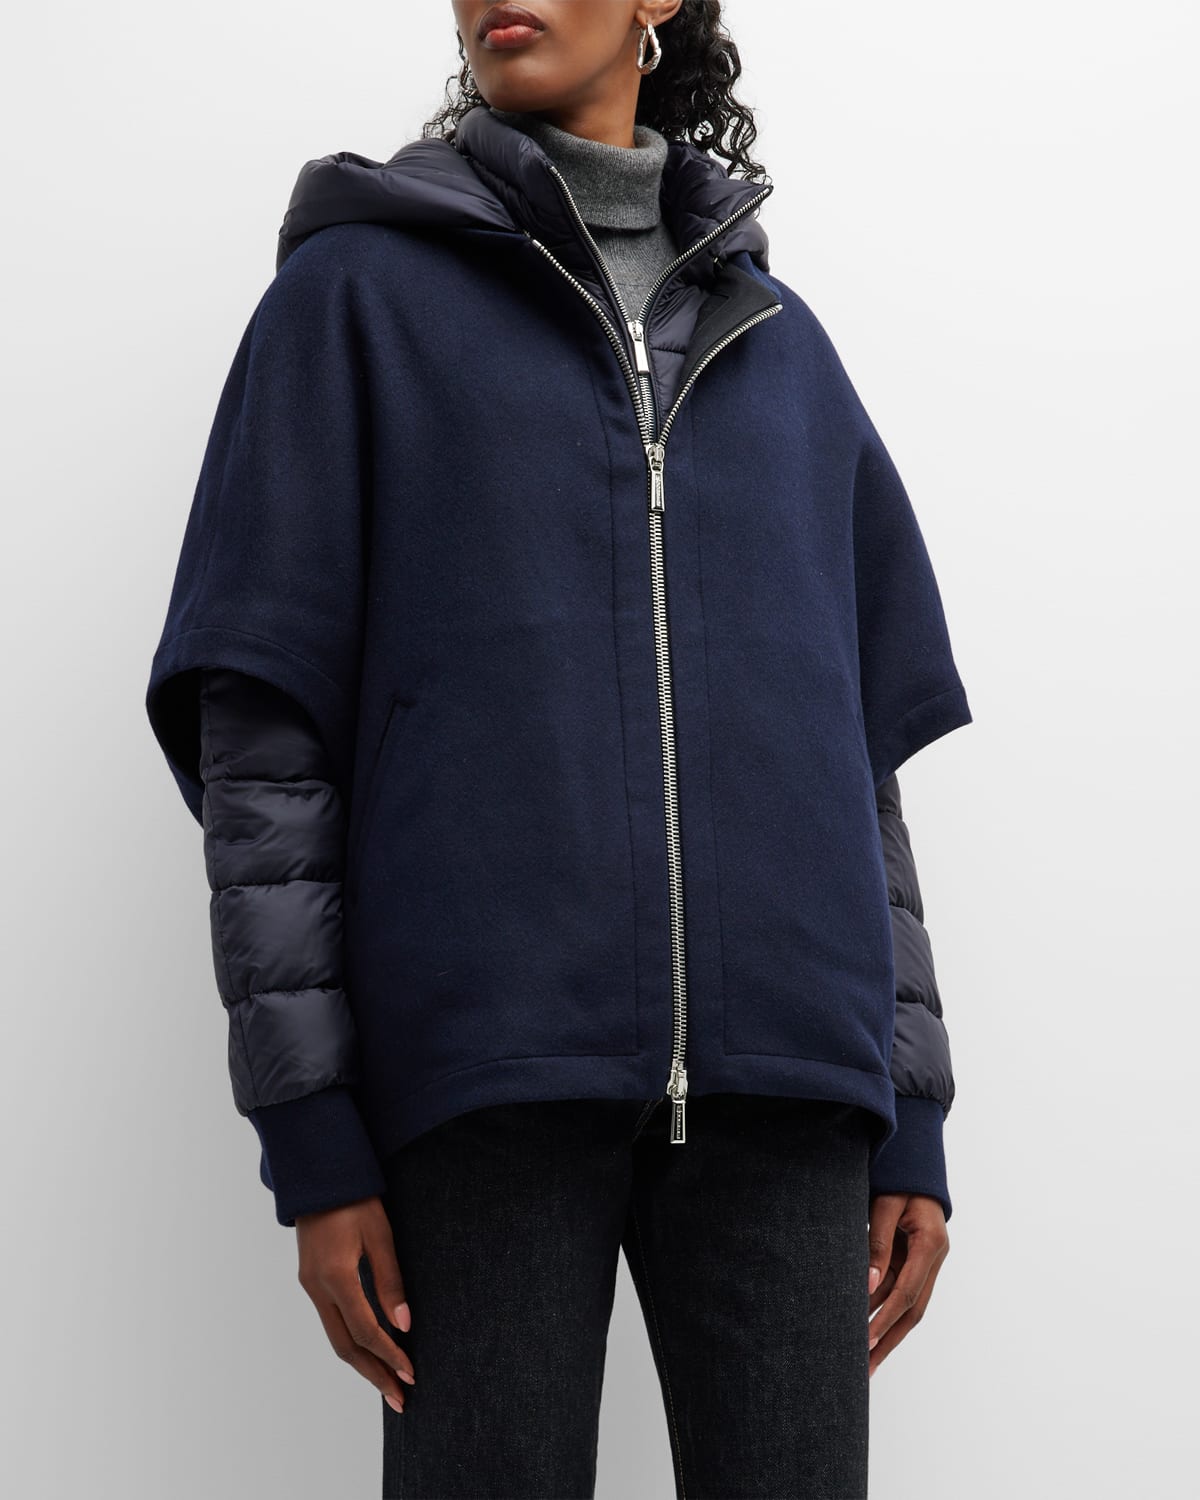 Pegaso 3-in-1 Layered Jacket with Hood